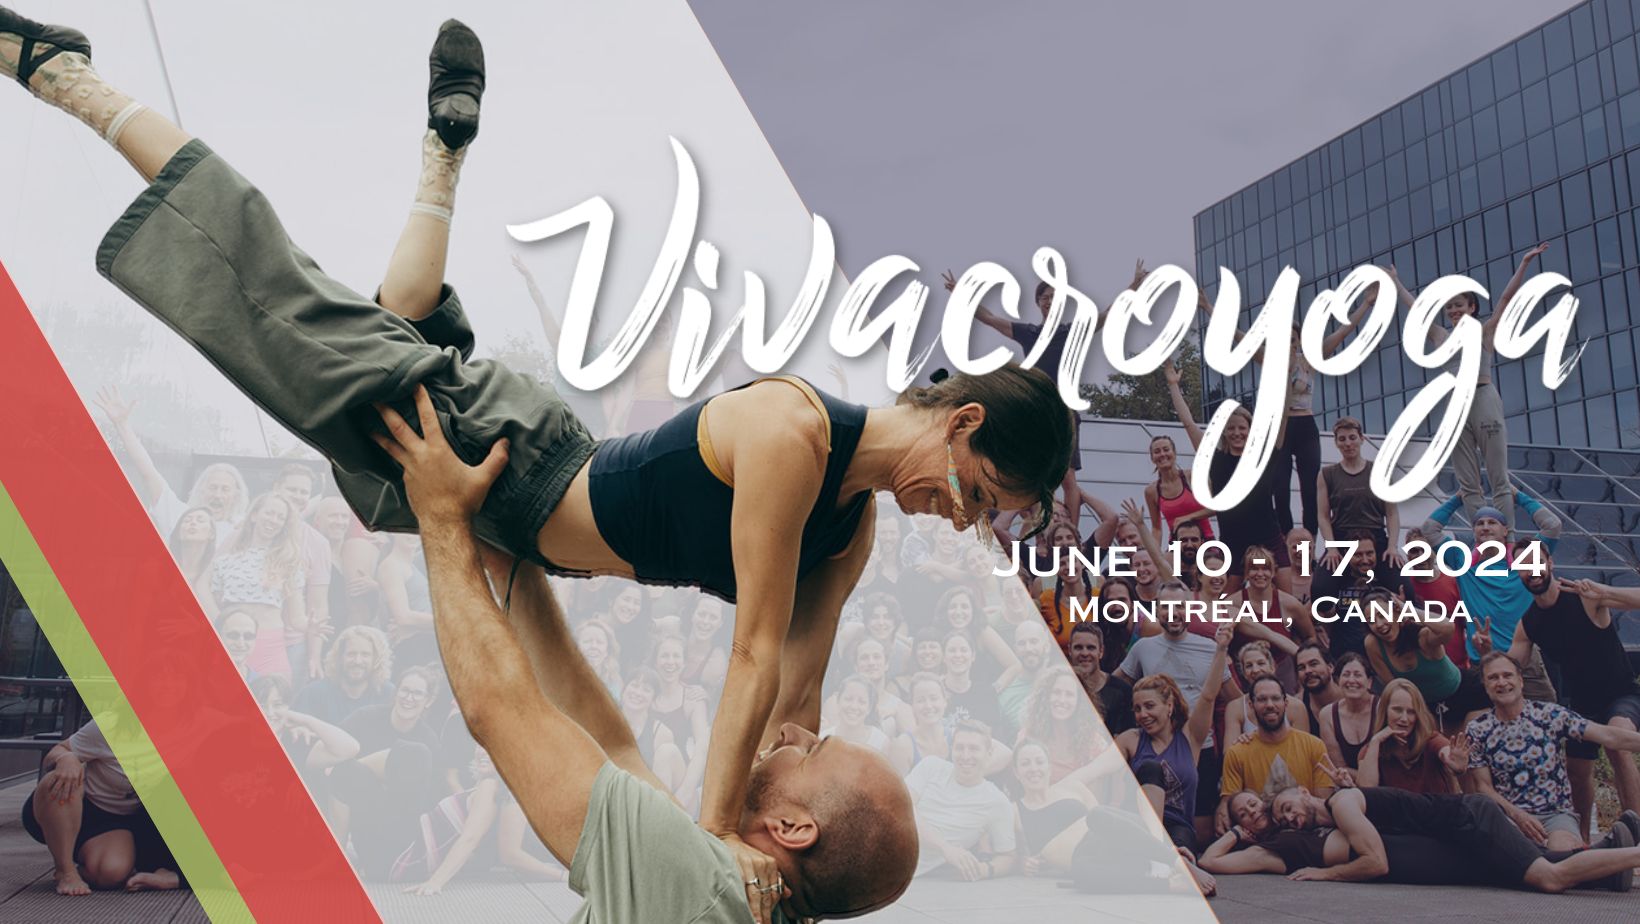 VIVAcroyoga Acroyoga Festival in Montreal, June 1017, 2024